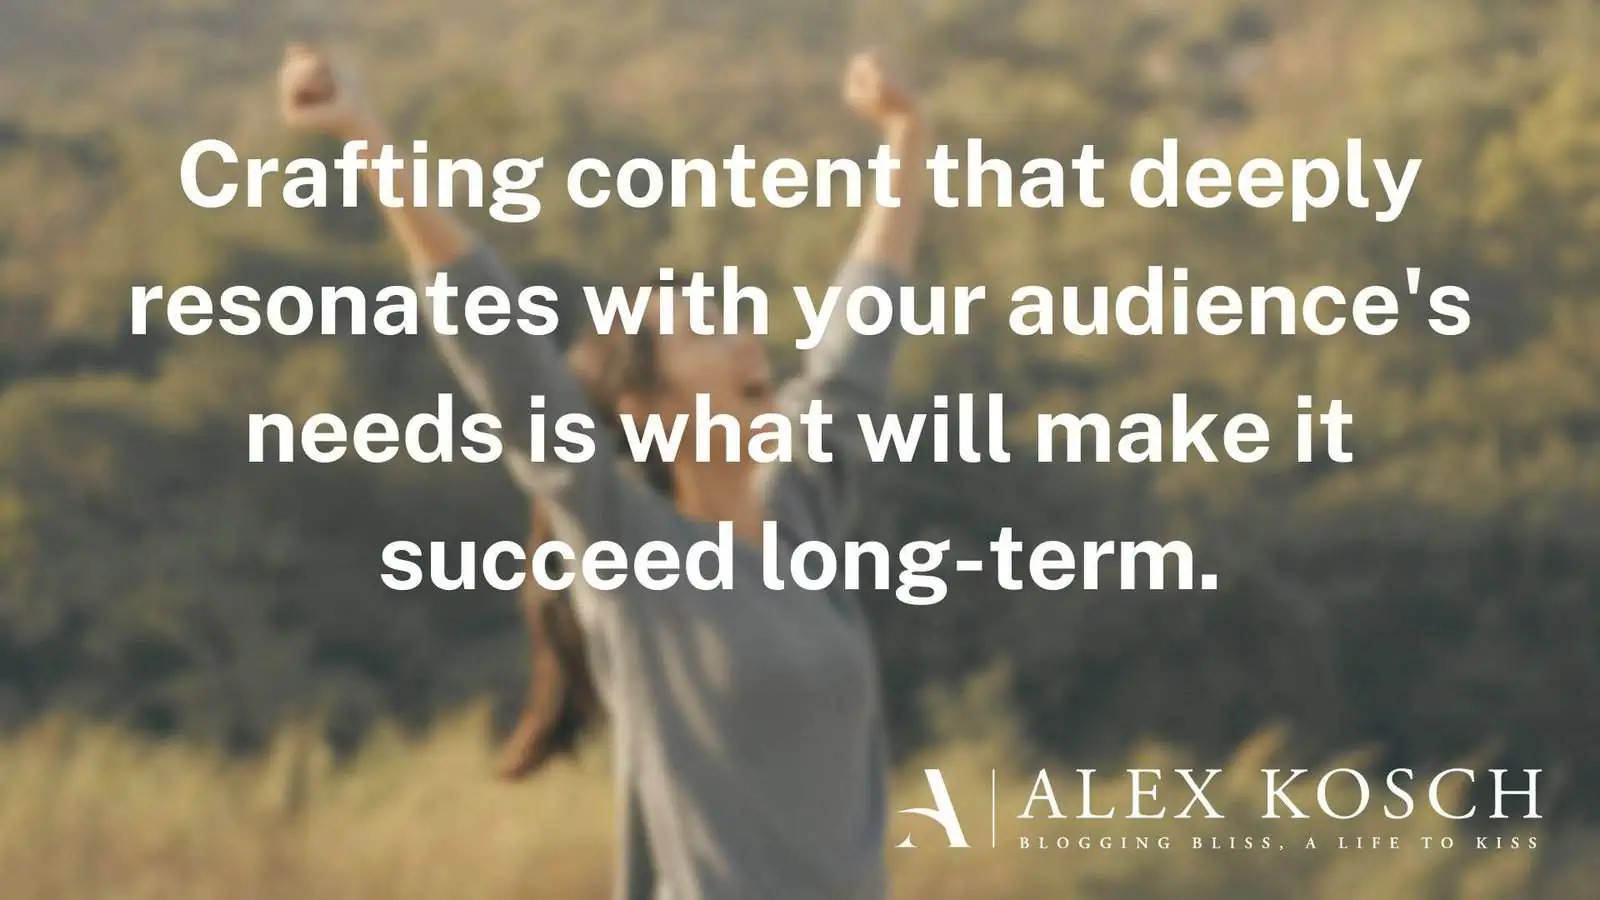 Crafting content that deeply resonates with your audience's needs is what will make it succeed long-term.